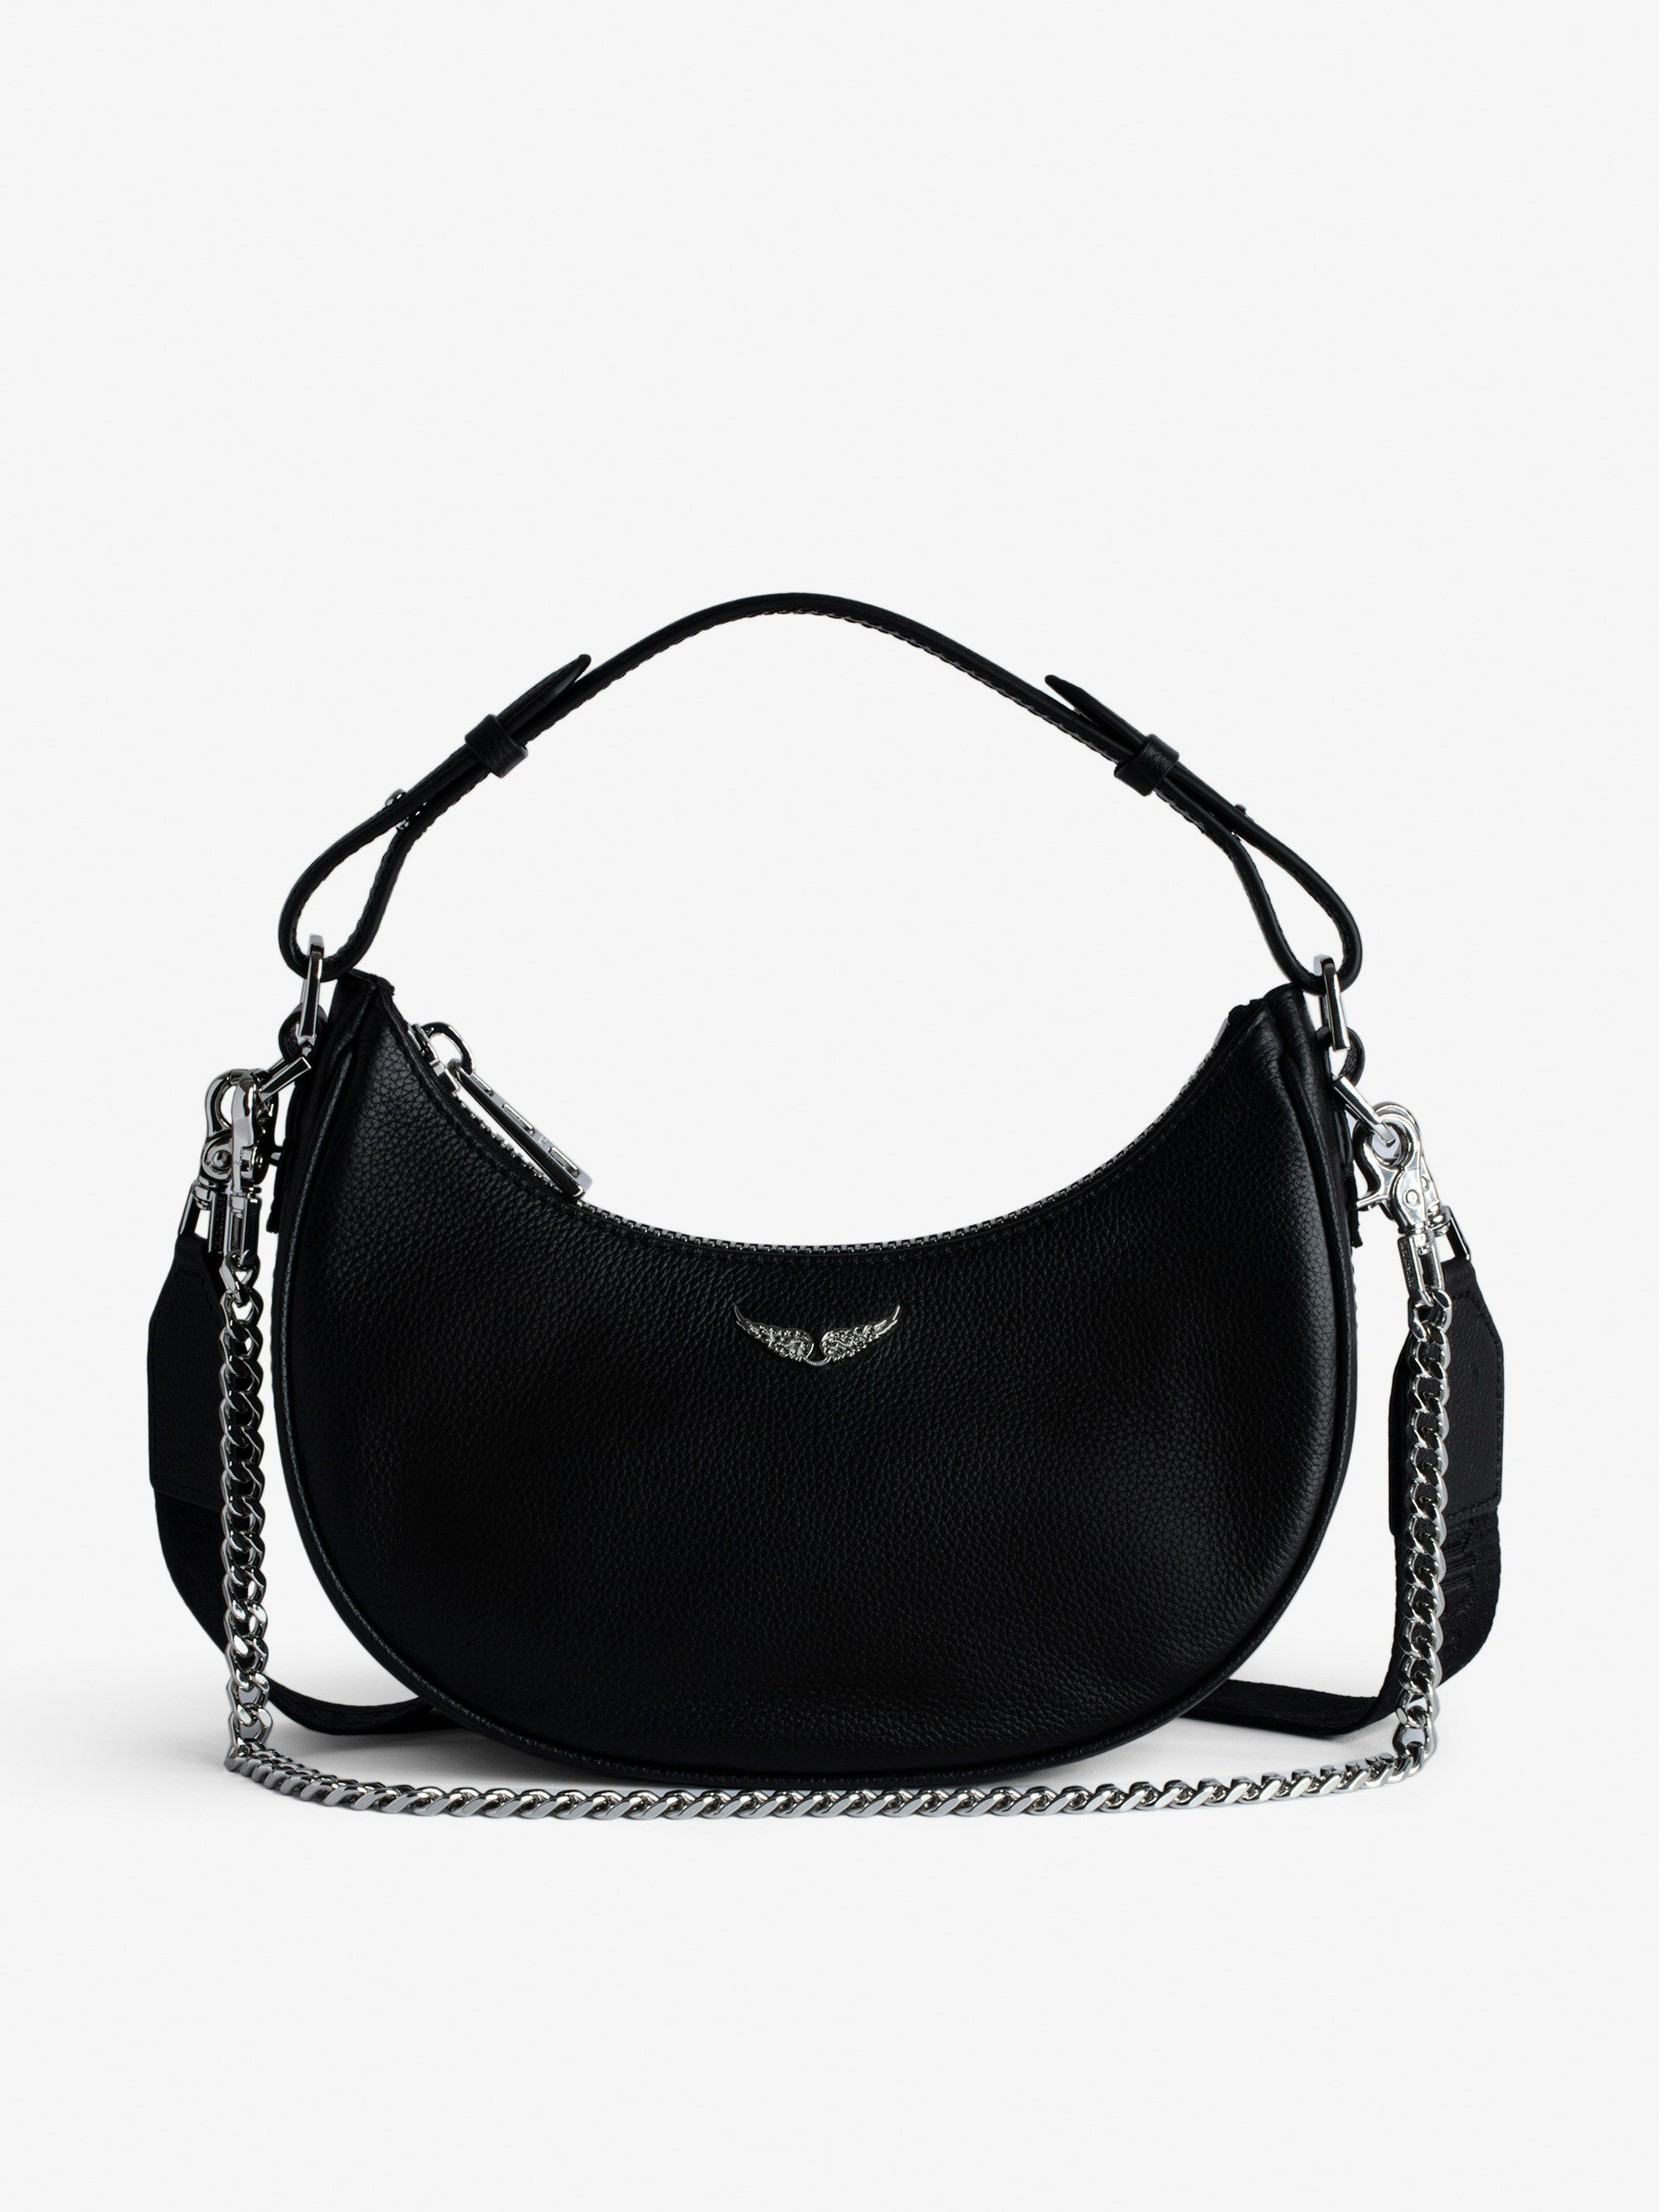 Moonrock Bag - Women’s half-moon bag in black grained leather with a short handle, shoulder strap, chain and signature wings.